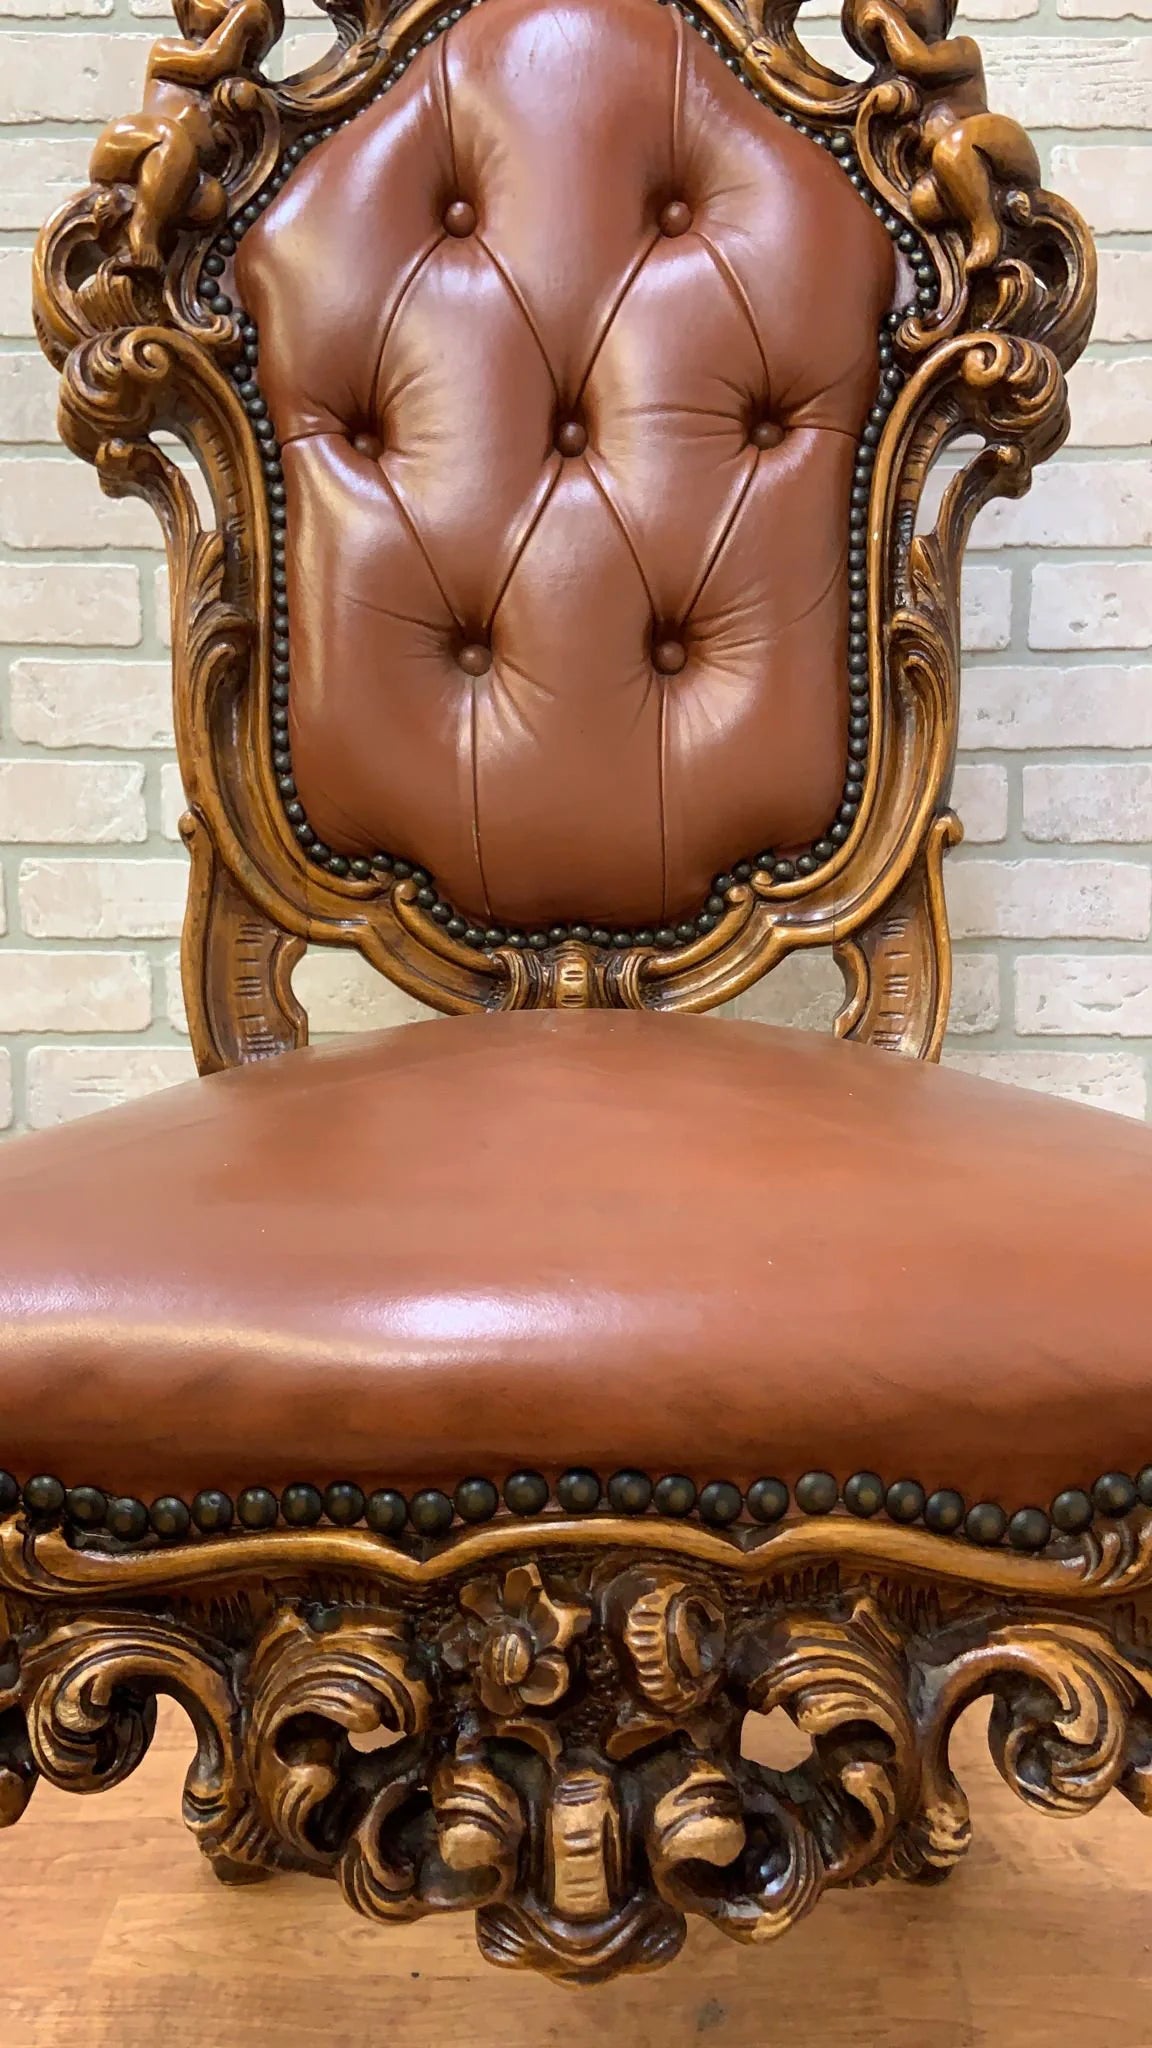 Antique Italian Rococo Style Heavily Carved Ornate Figural Tufted Dining Chairs in a Original Brown Leather - Set of 4